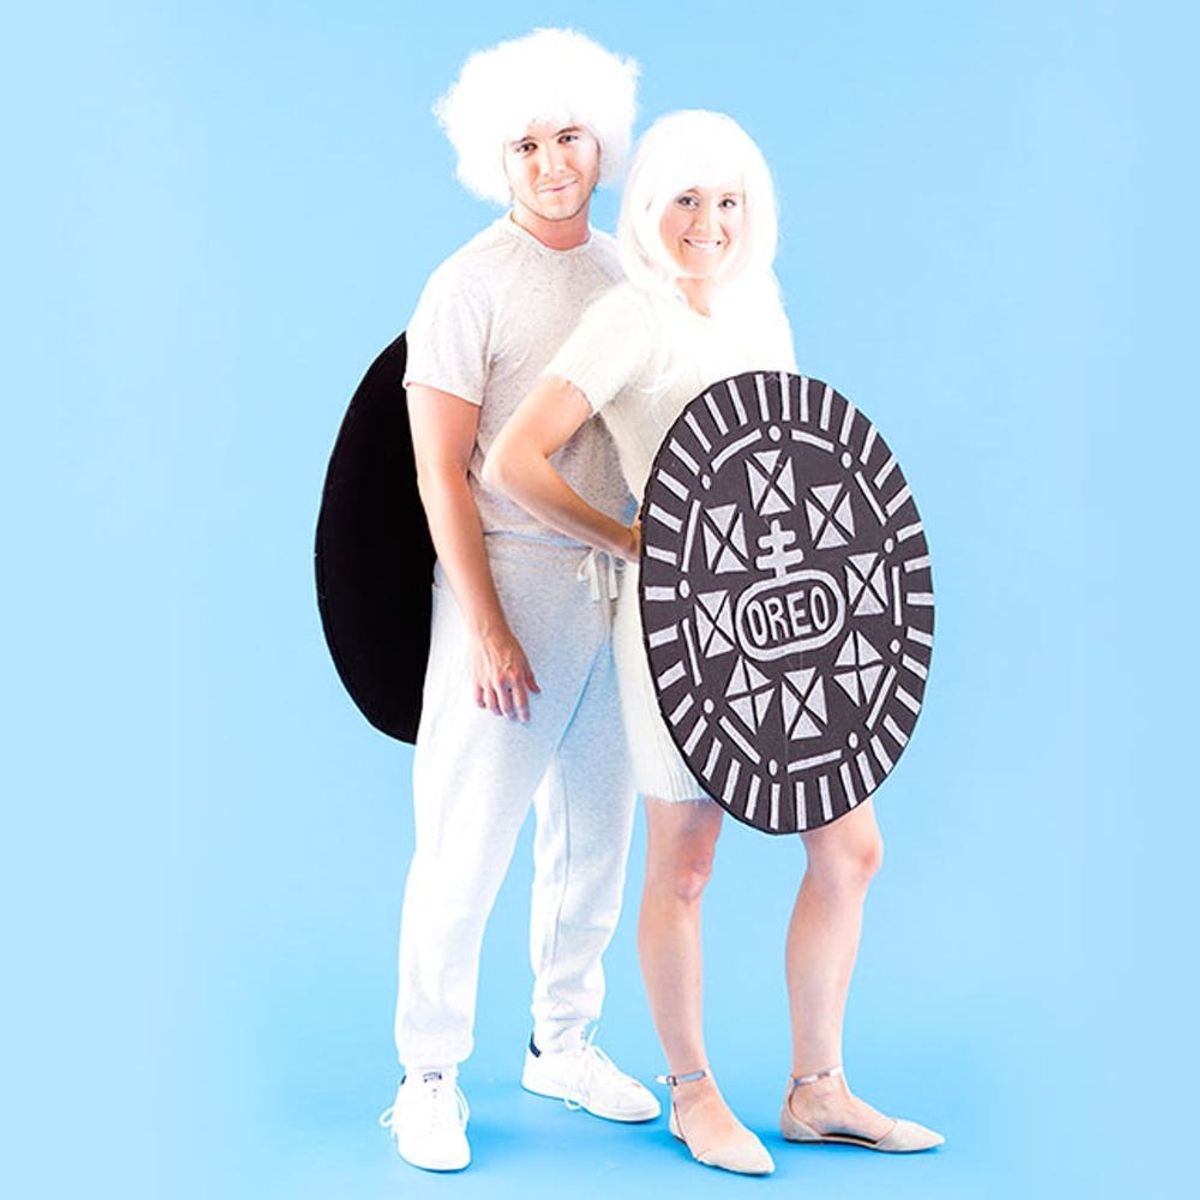 How to Make a Double-Stuffed OREO Costume With Your Boo for Halloween